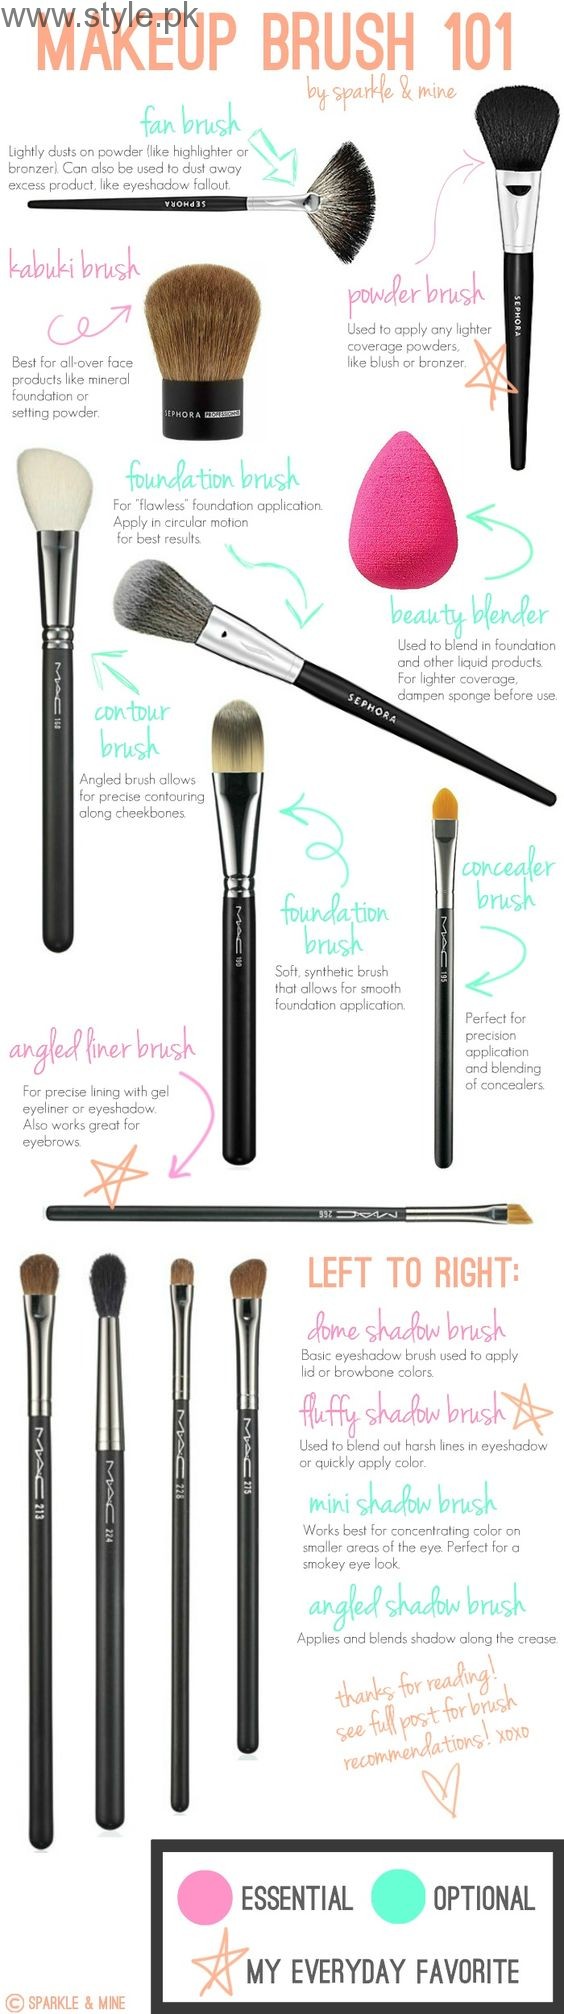 Basic Makeup Brushes Guide For Beginners Style Pk